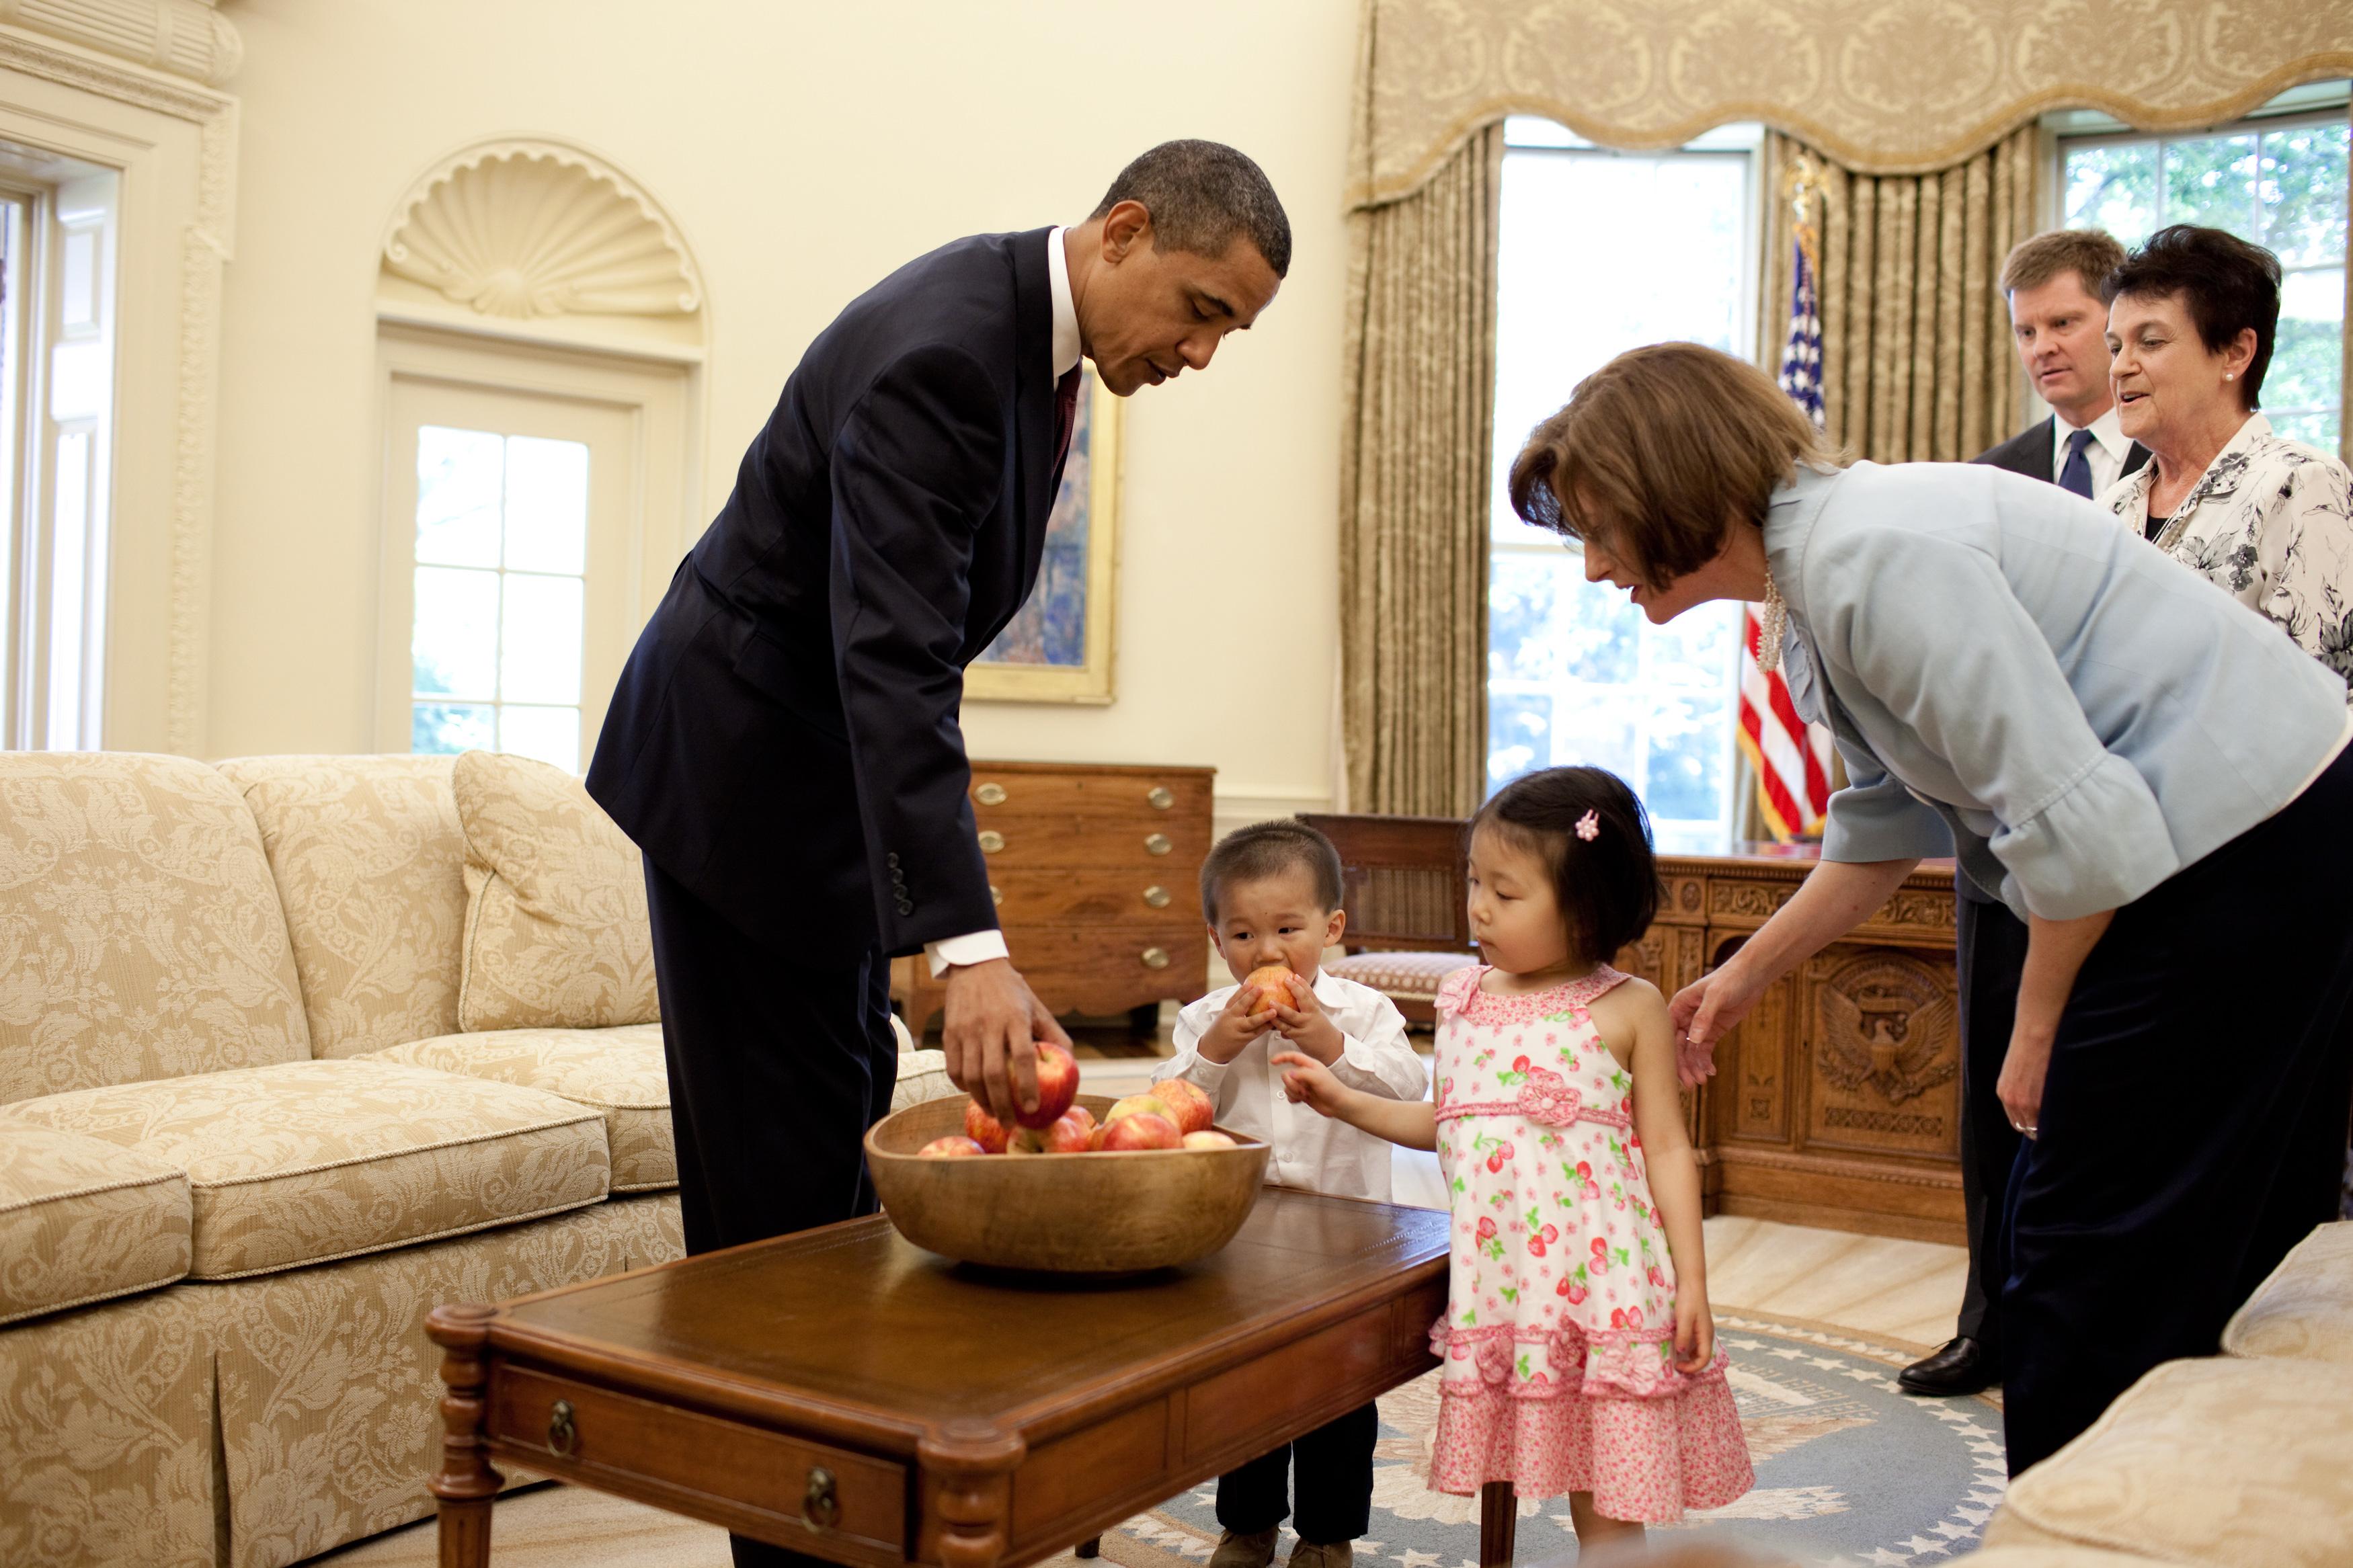 President Barack Obama in the Oval Office with former White House Communications Director Ellen Moran and her family, June 24, 2009.  (Official White House Photo by Pete Souza) This official White House photograph is being made available for publication by news organizations and/or for personal use printing by the subject(s) of the photograph. The photograph may not be manipulated in any way or used in materials, advertisements, products, or promotions that in any way suggest approval or endorsement of the President, the First Family, or the White House.